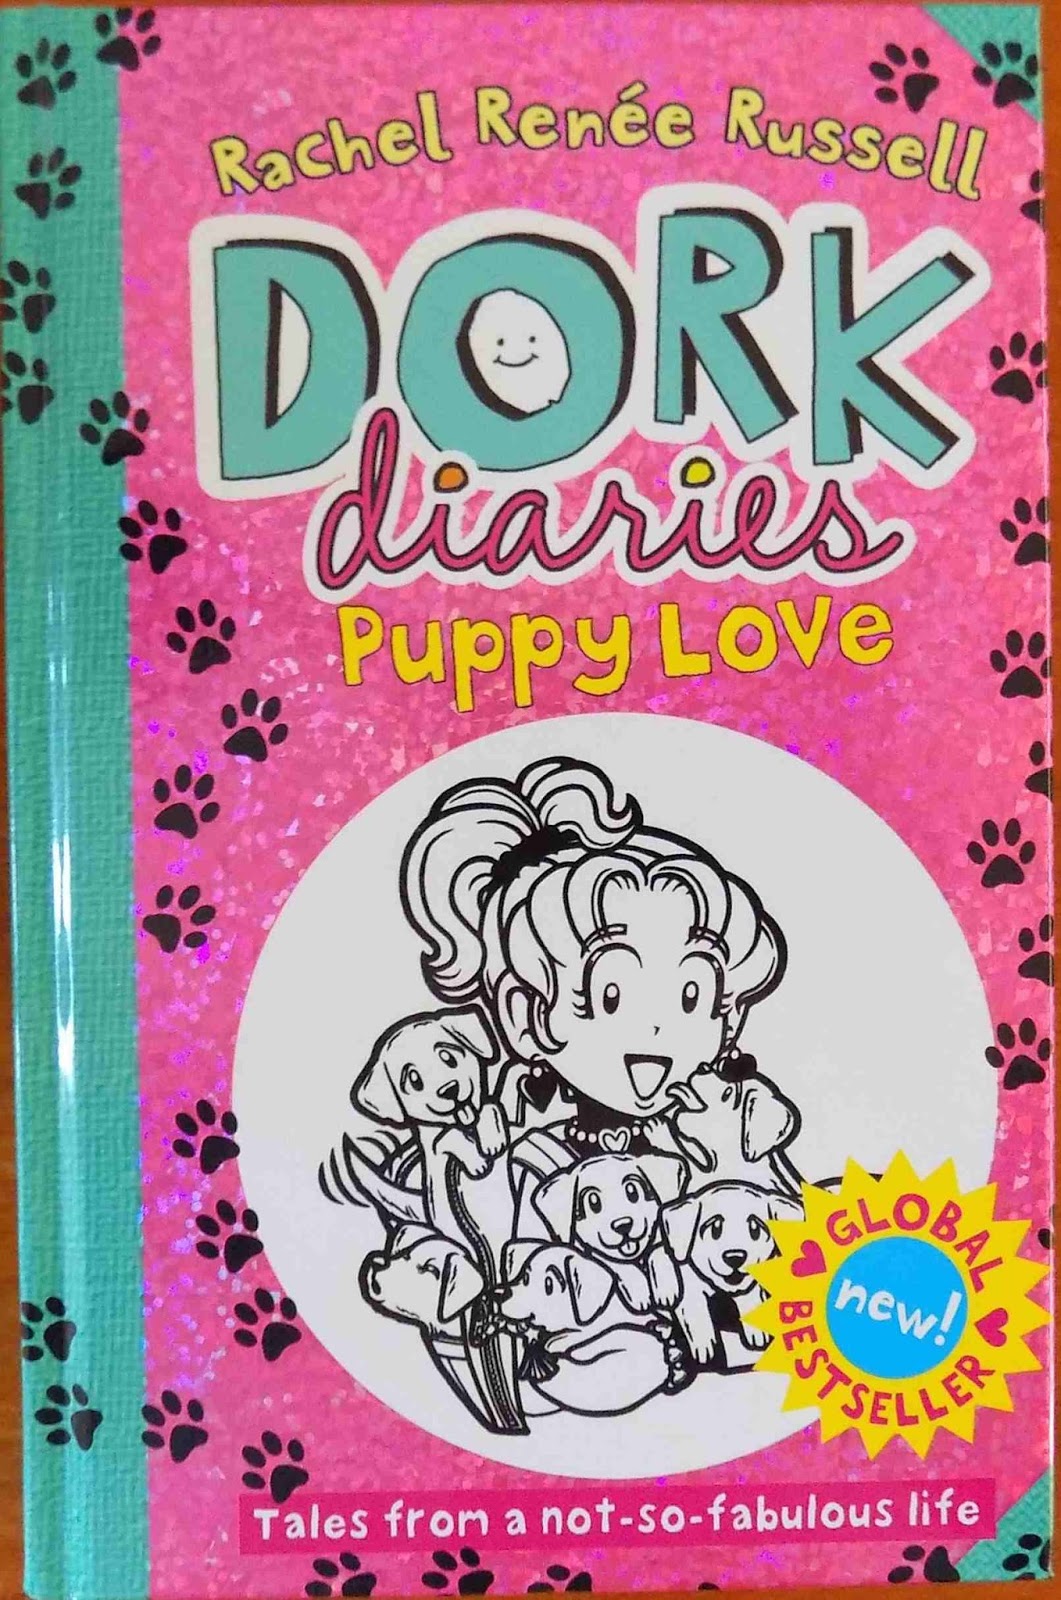 Madhouse Family Reviews Children's book review Dork